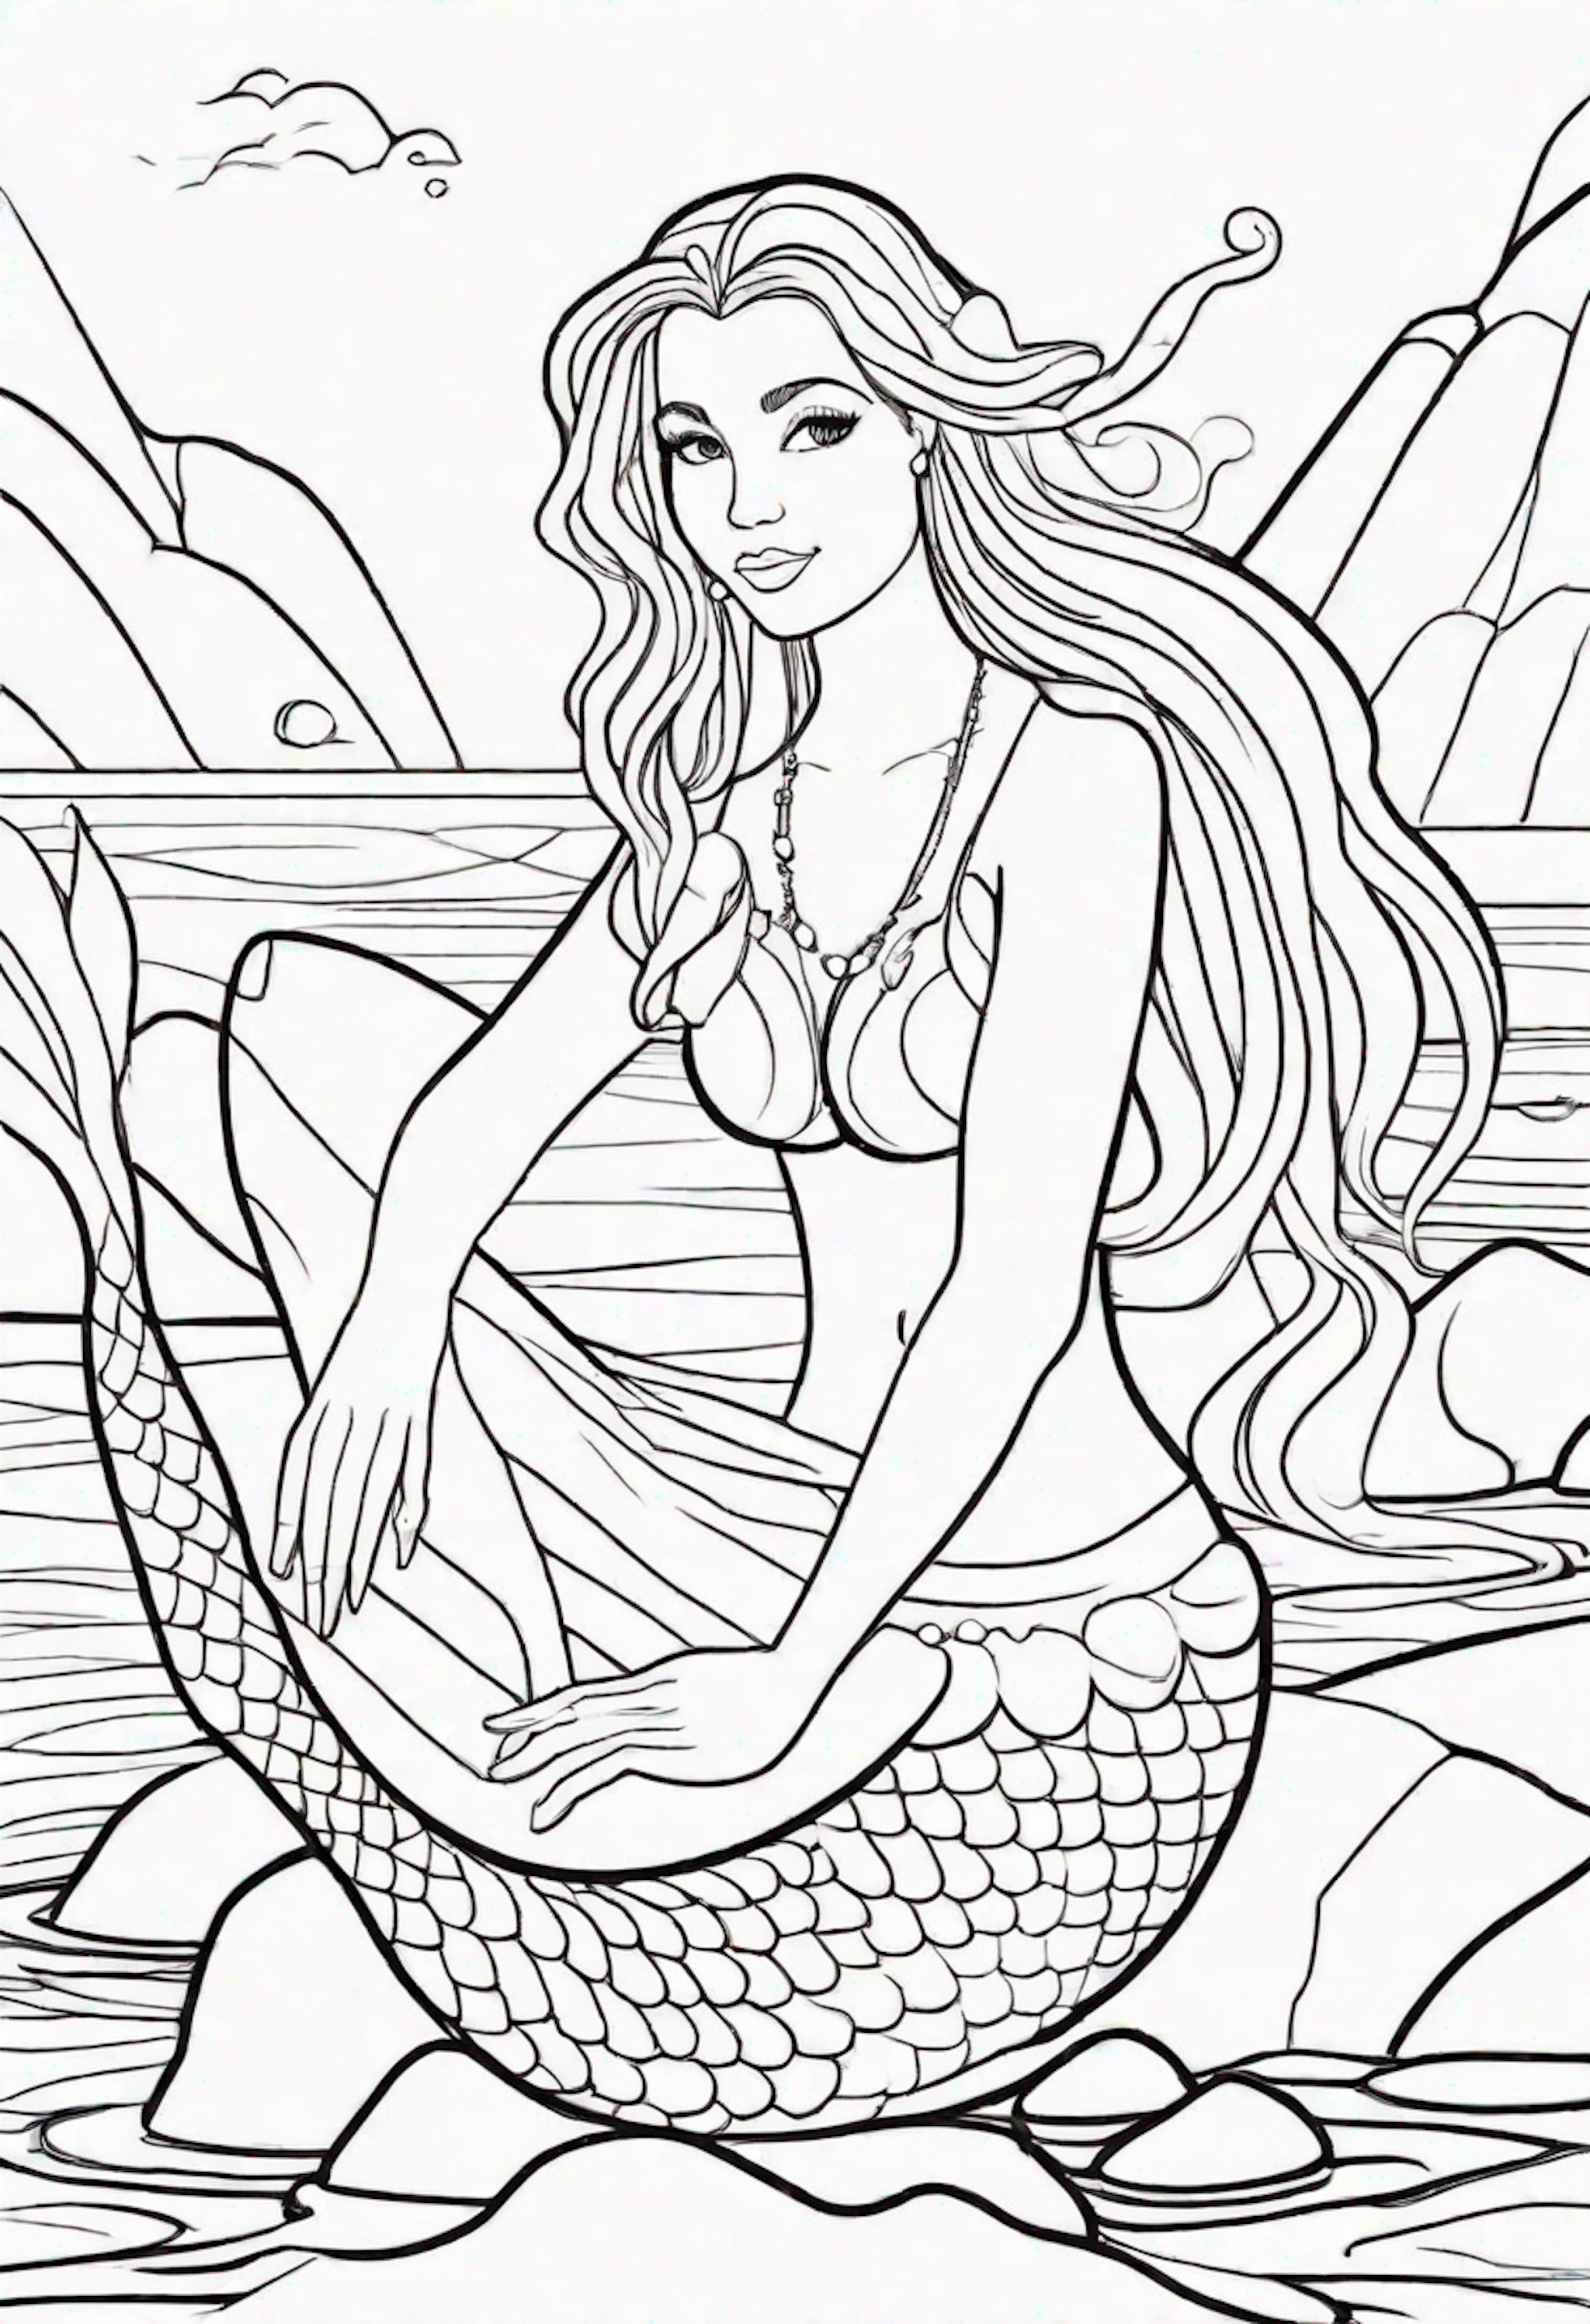 A coloring page for 1 Mermaid coloring pages